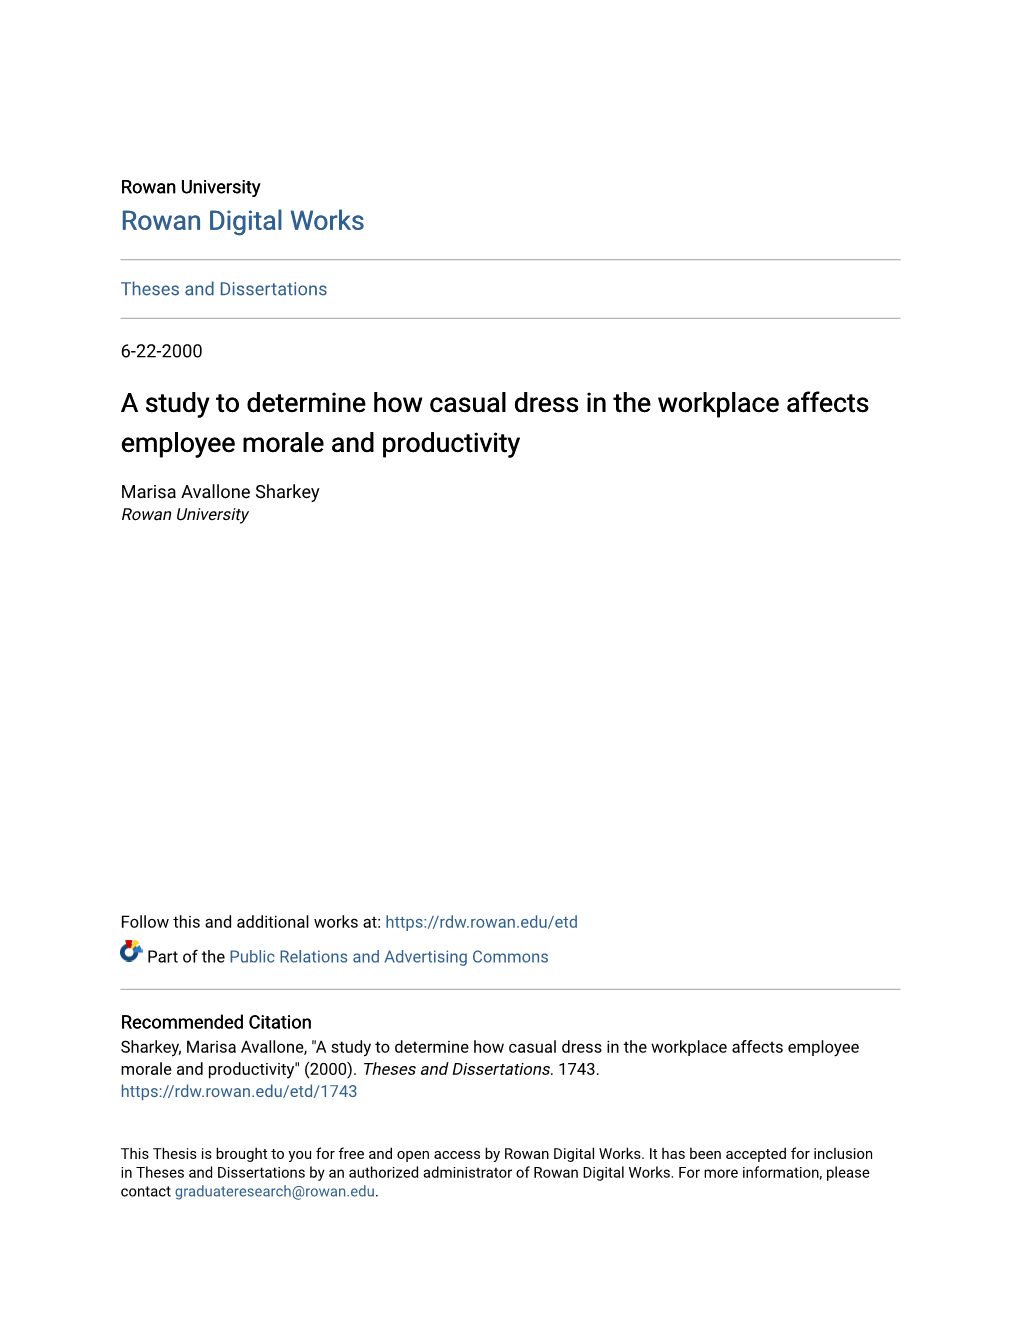 A Study to Determine How Casual Dress in the Workplace Affects Employee Morale and Productivity